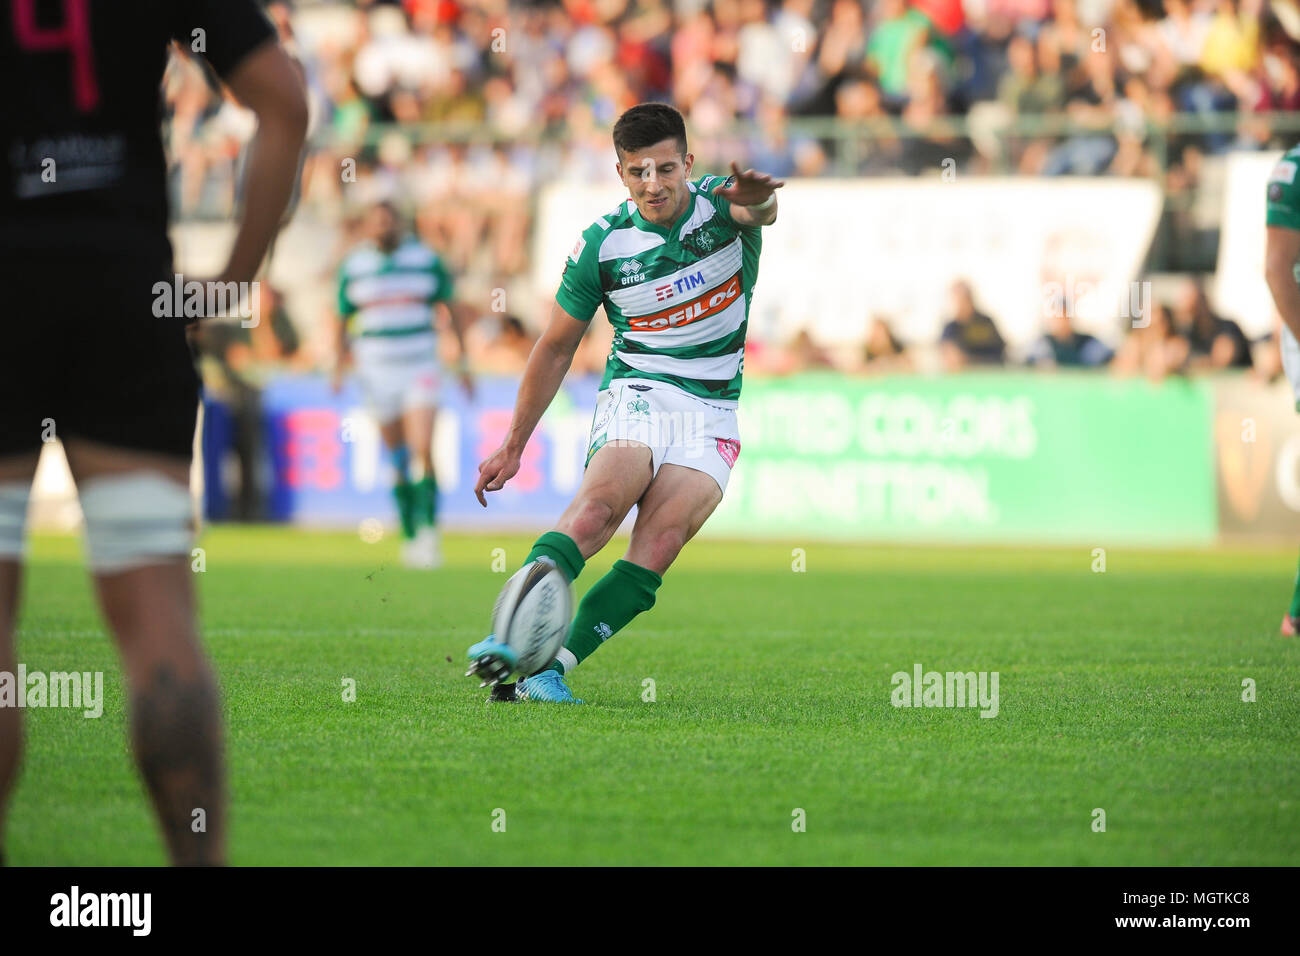 Treviso, Italy. 28th April, 2018. Benetton's fly half Tommaso Allan with a  conversion kick in the italian derby against Zebre Rugby Club in  GuinnessPro14©Massimiliano Carnabuci/Alamy Live news Stock Photo - Alamy